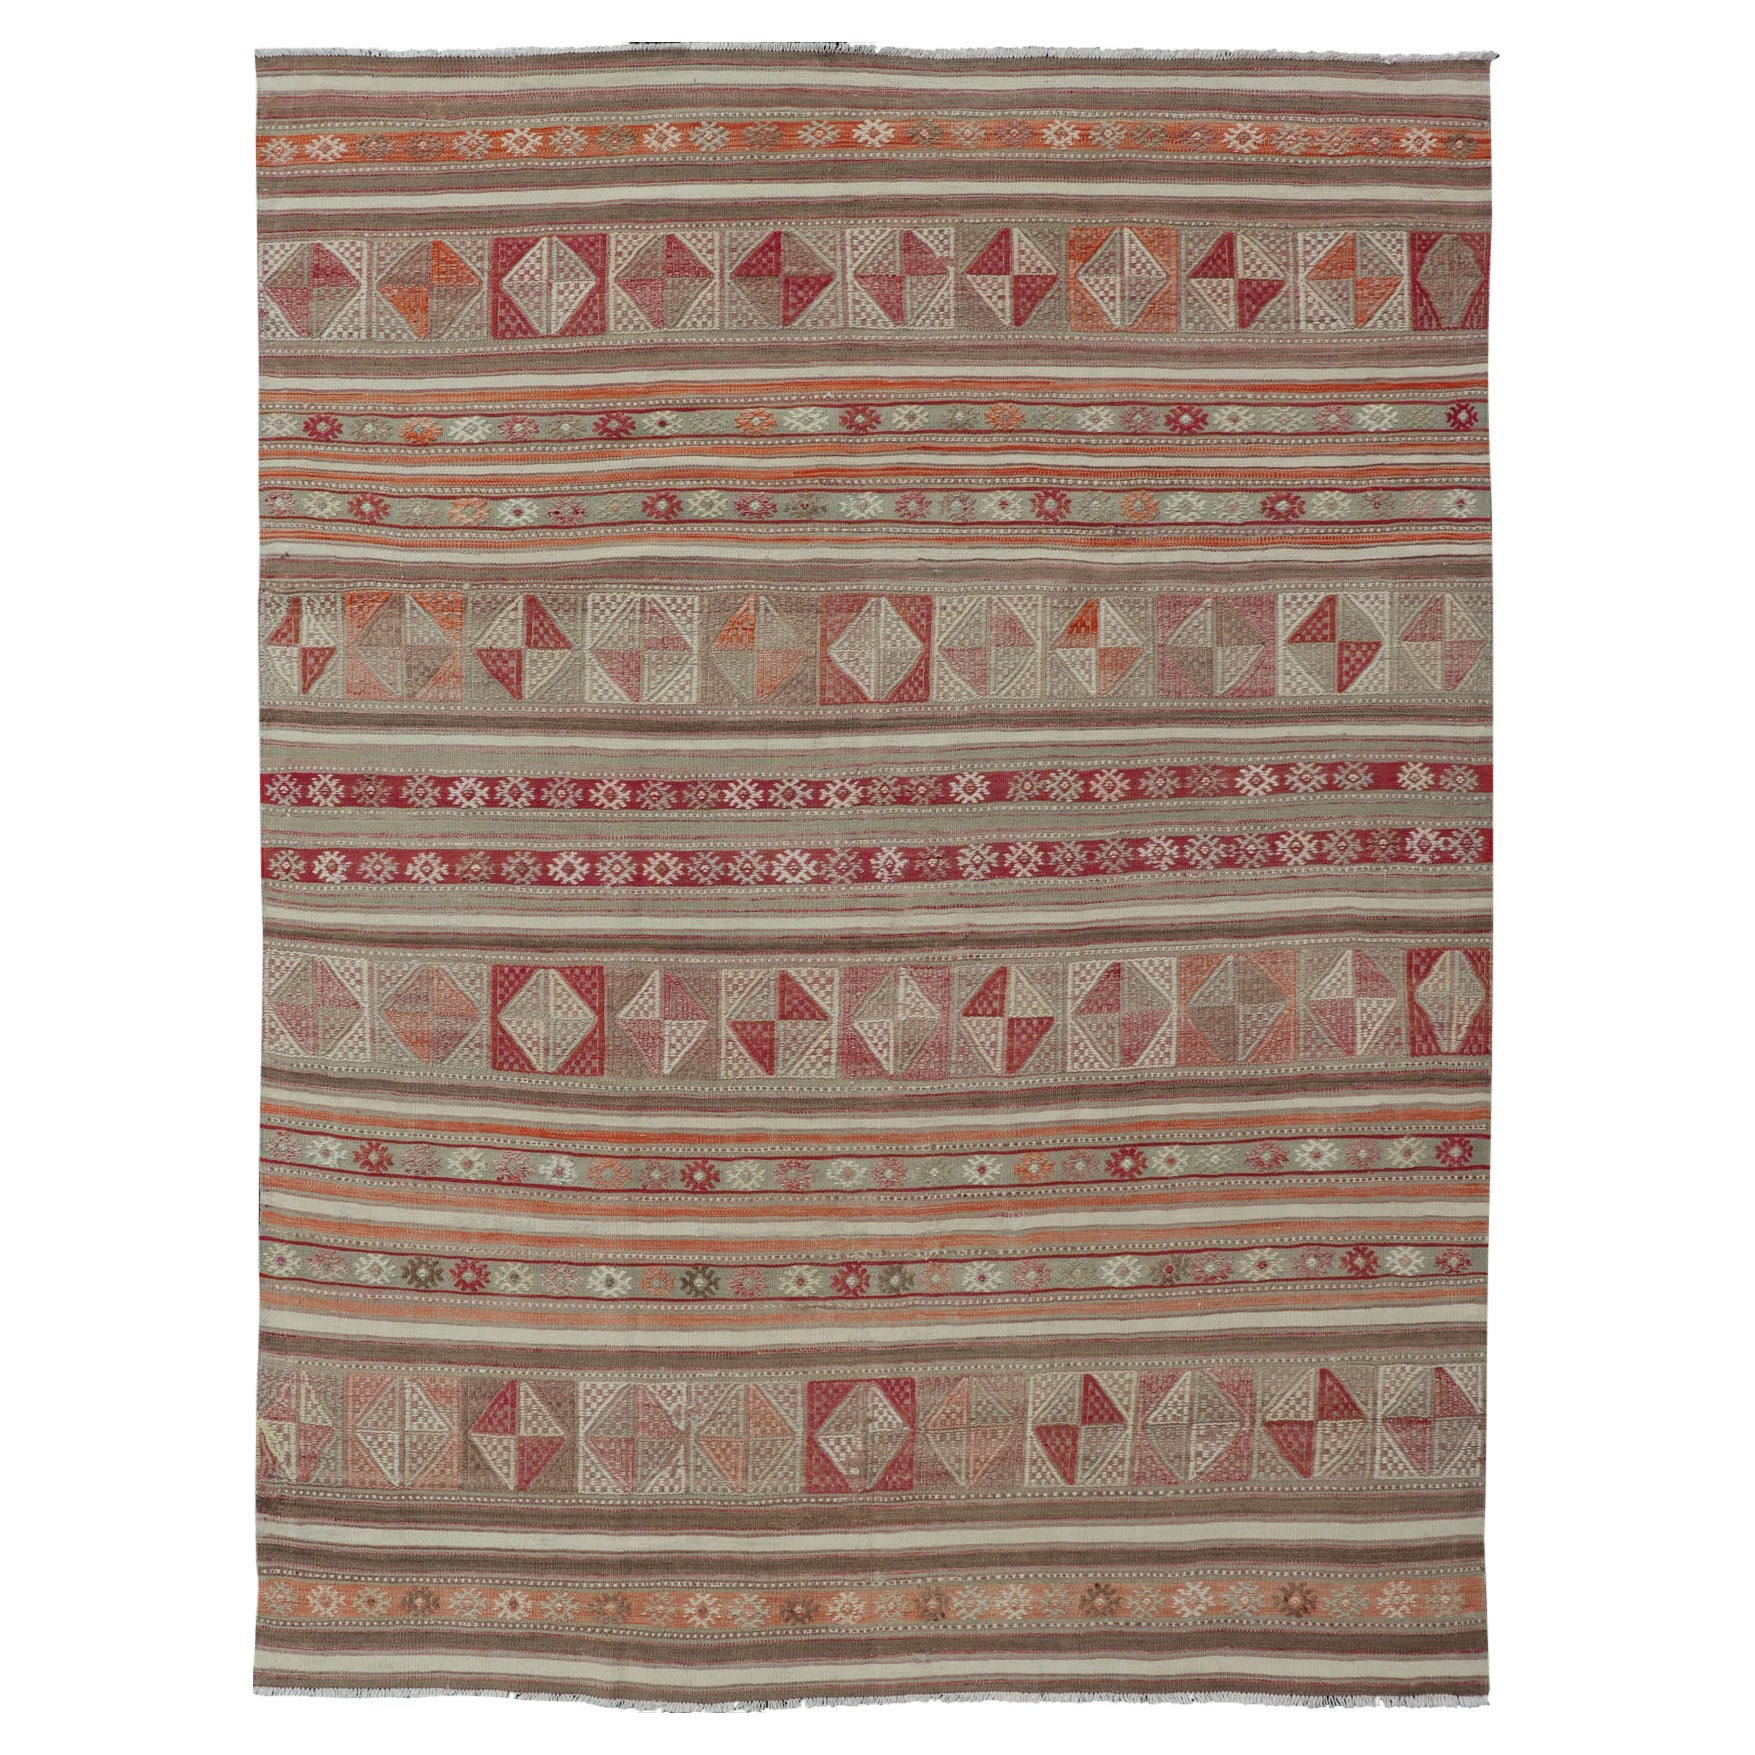 Colorful Turkish Vintage Embroidered Kilim with Stripes and Geometric Motifs For Sale